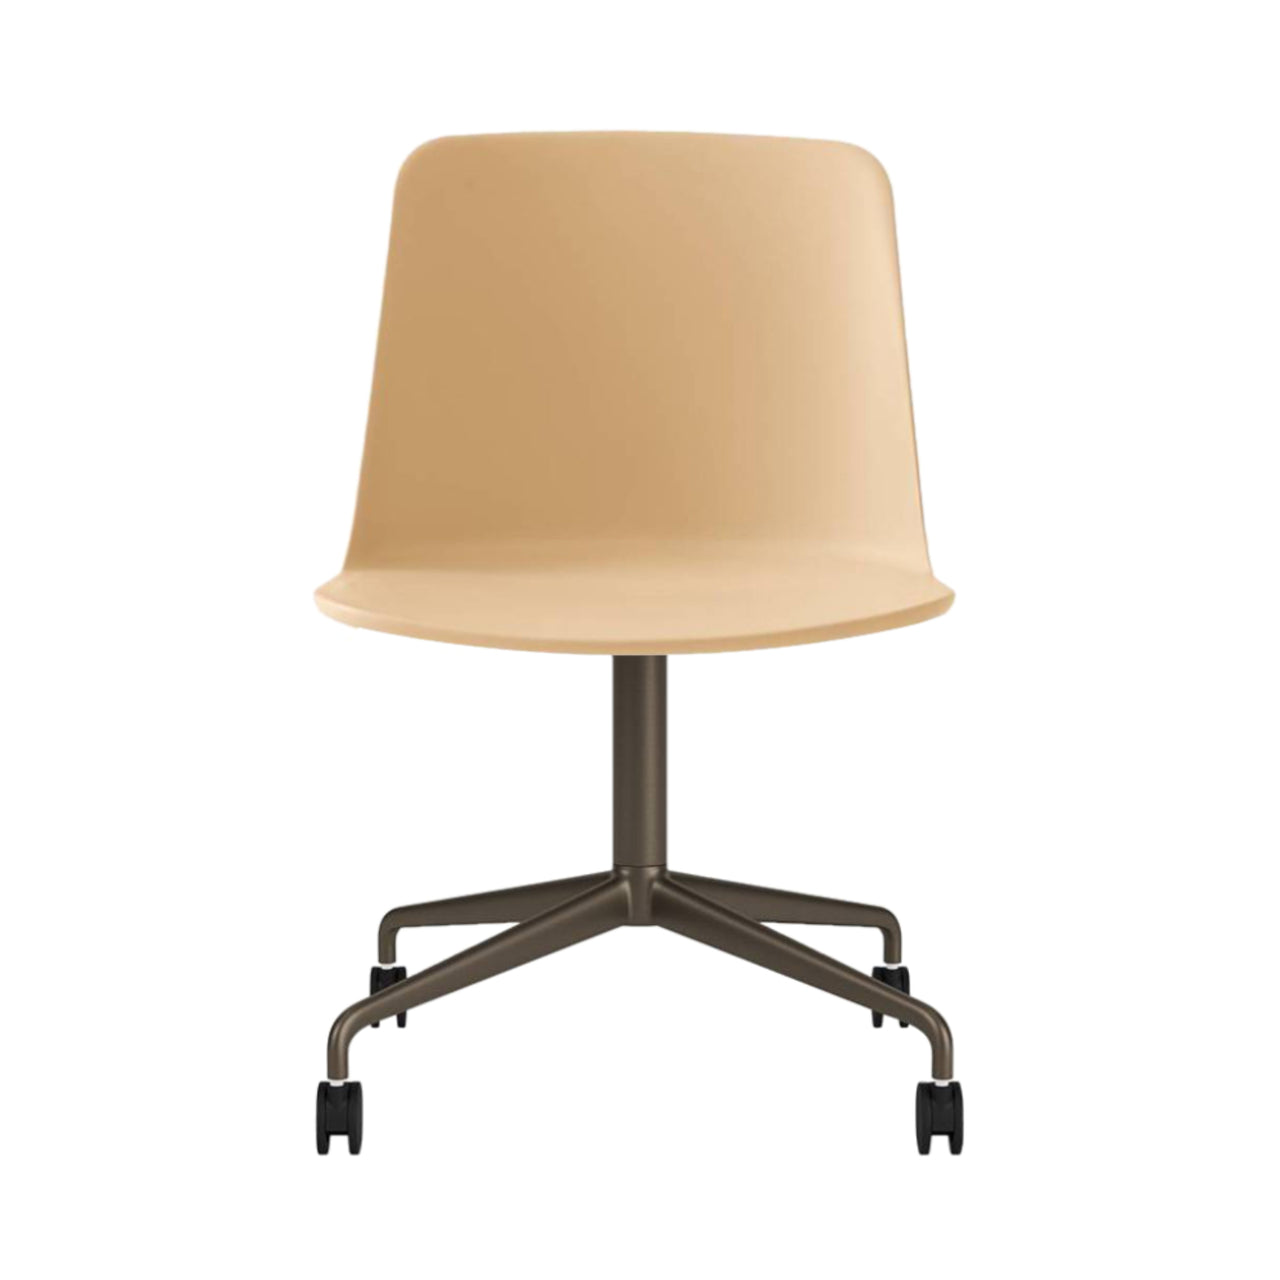 Rely Chair HW21: Beige Sand + Bronzed